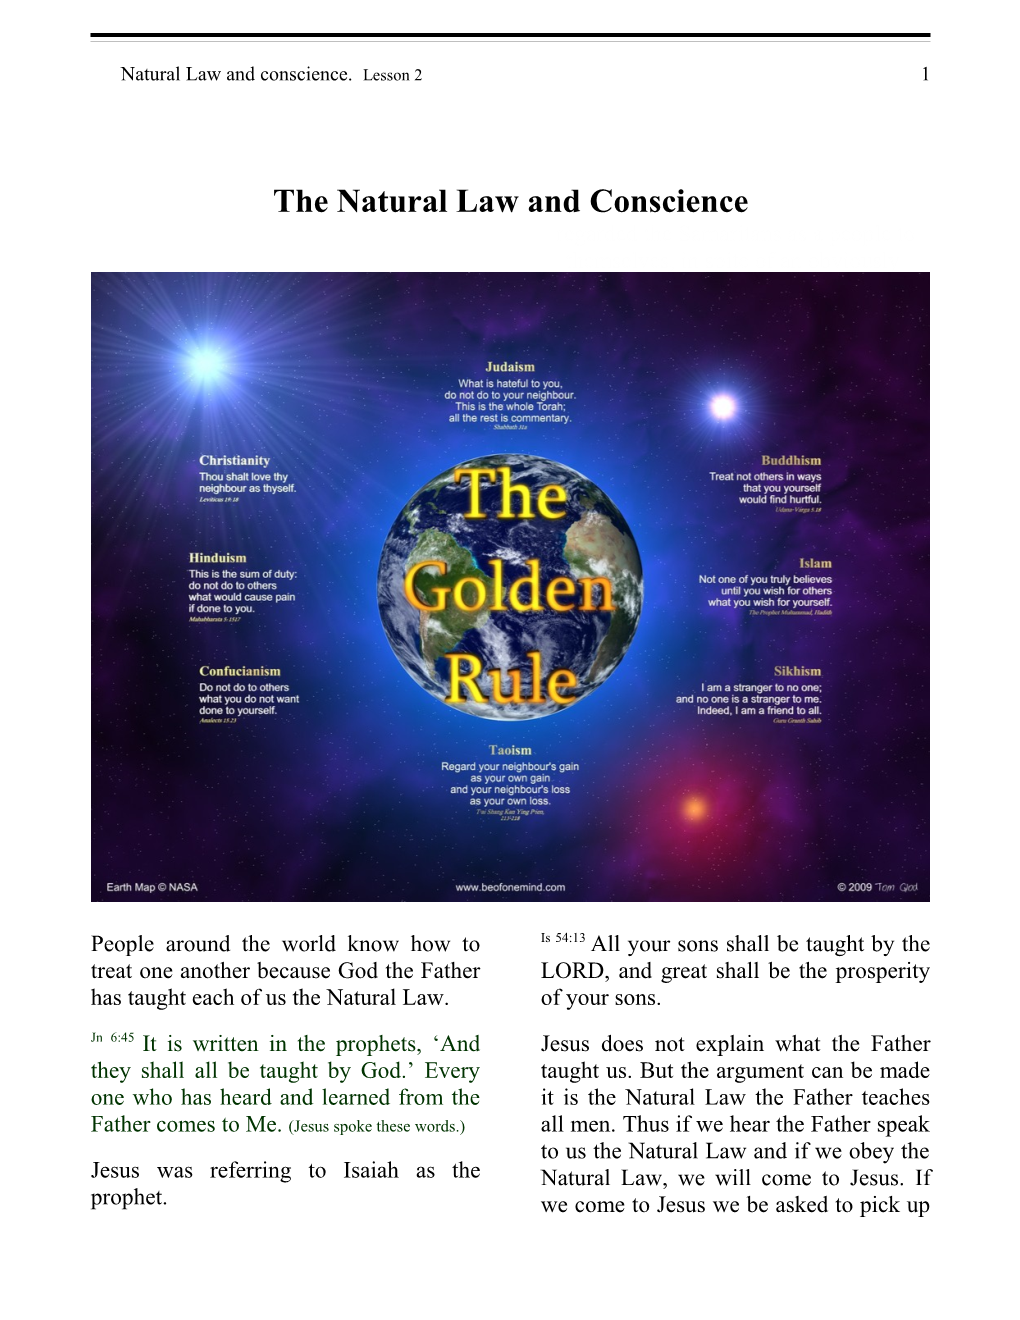 Natural Law and Conscience. Lesson 2